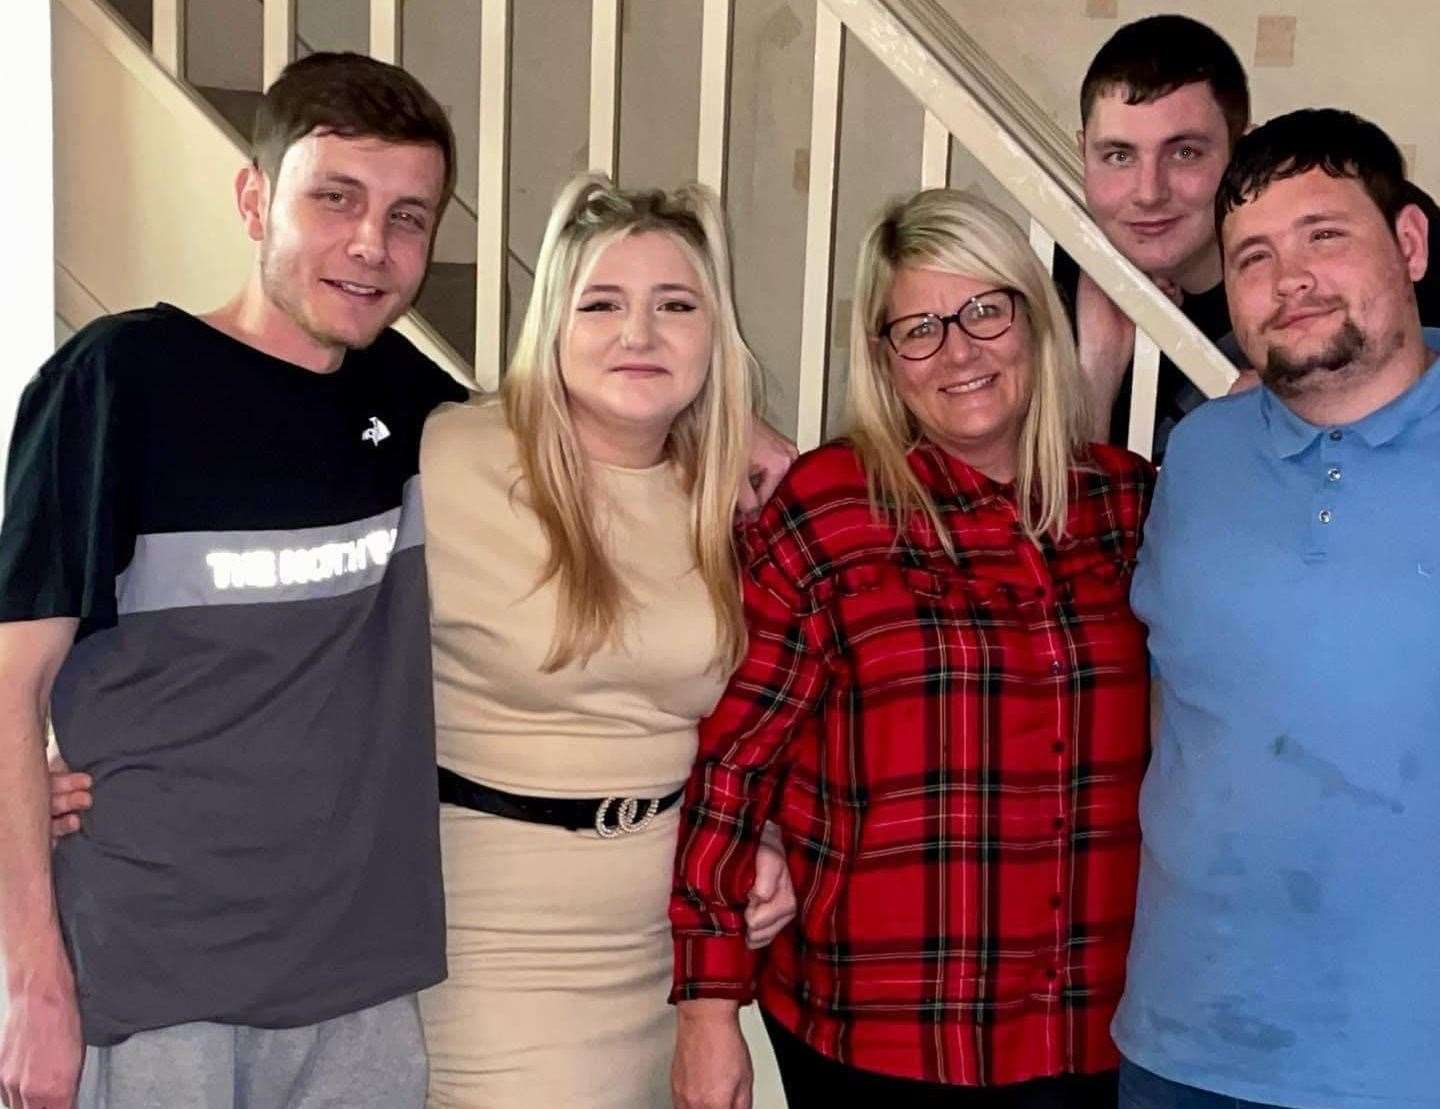 Left to right: Stephen with sister Ruby, mum Luisa and brothers Callum and Josh